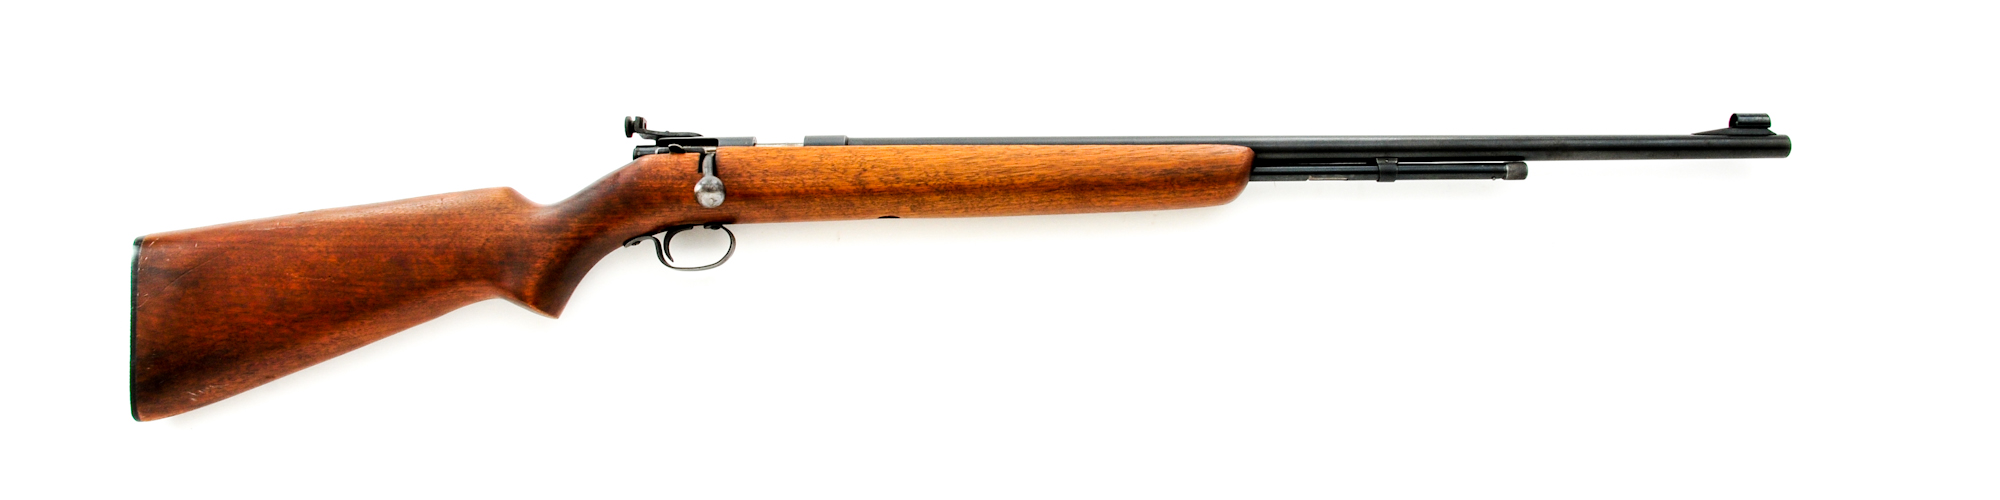 Winchester Model 72 Target Bolt Action Rifle